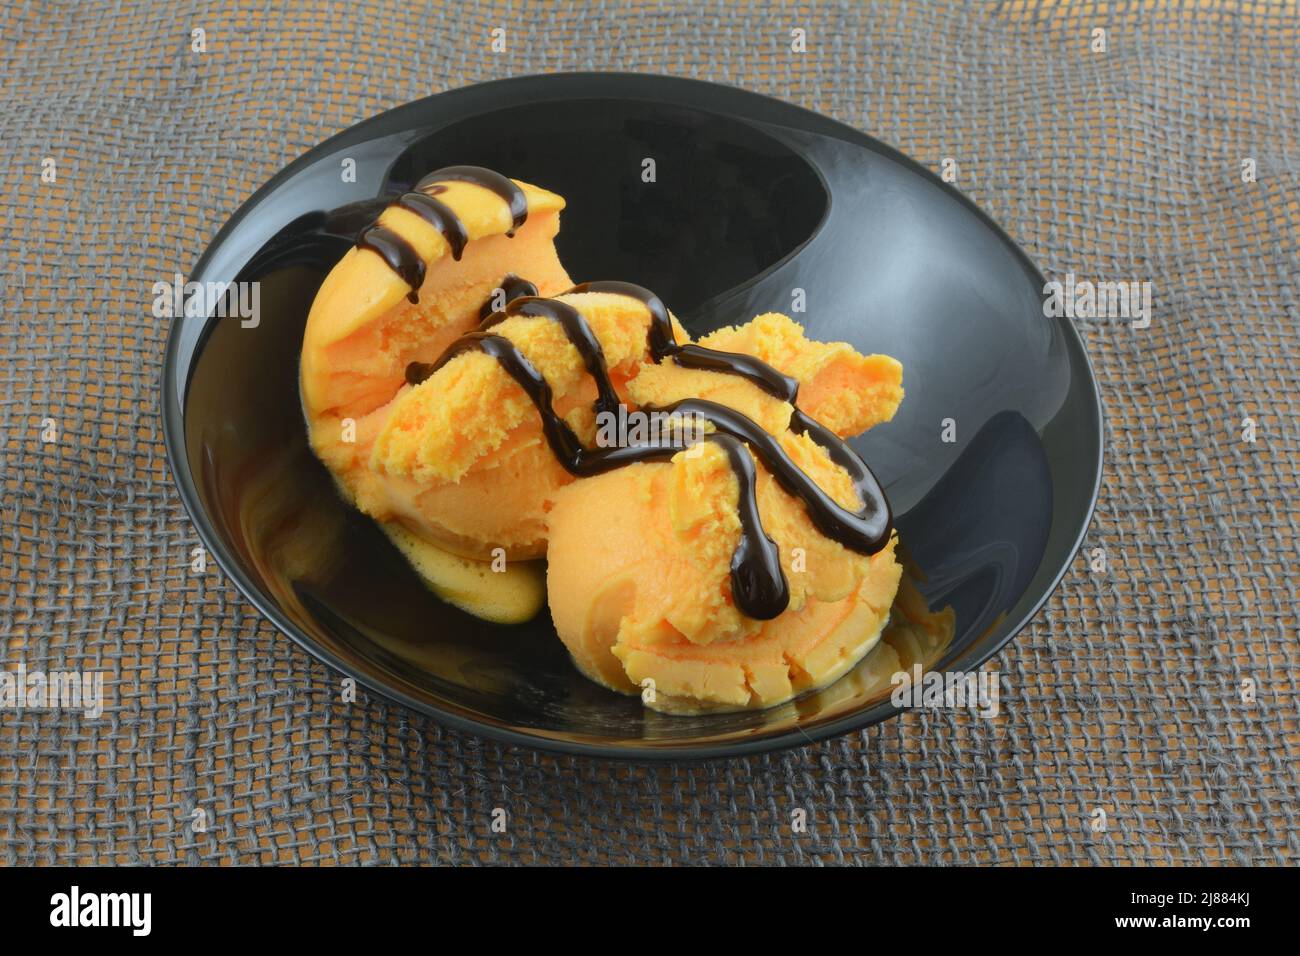 Two scoops of orange sherbet with chocolate syrup topping in black bowl on gray burlap Stock Photo